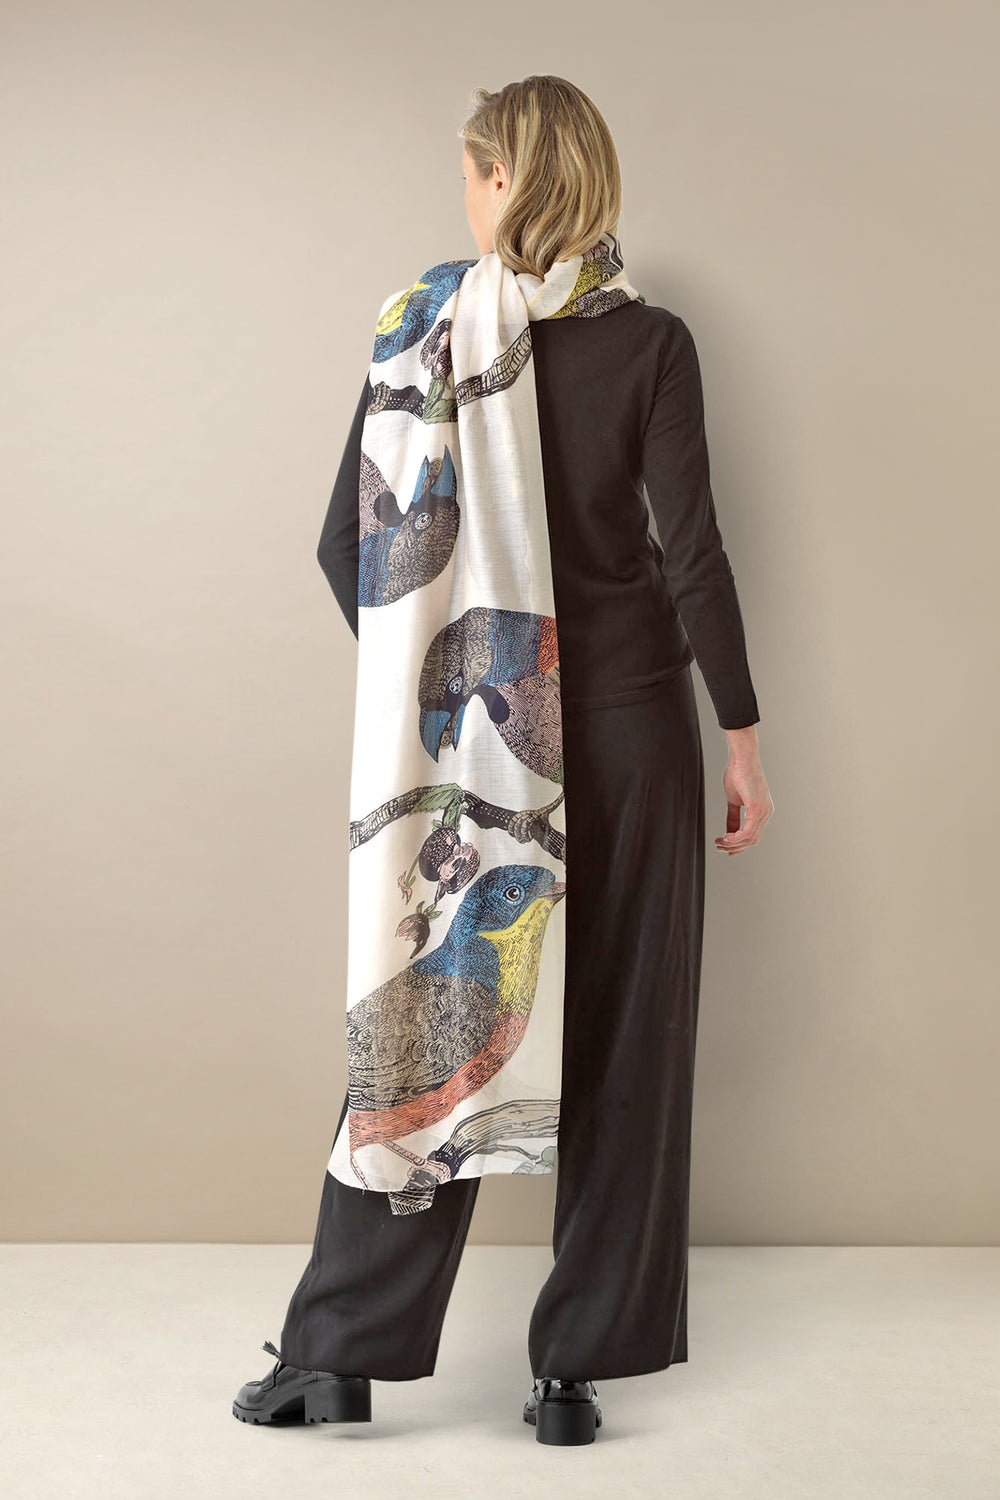 ladies winter scarf with a colourful bird print on a light stone background by One Hundred Stars